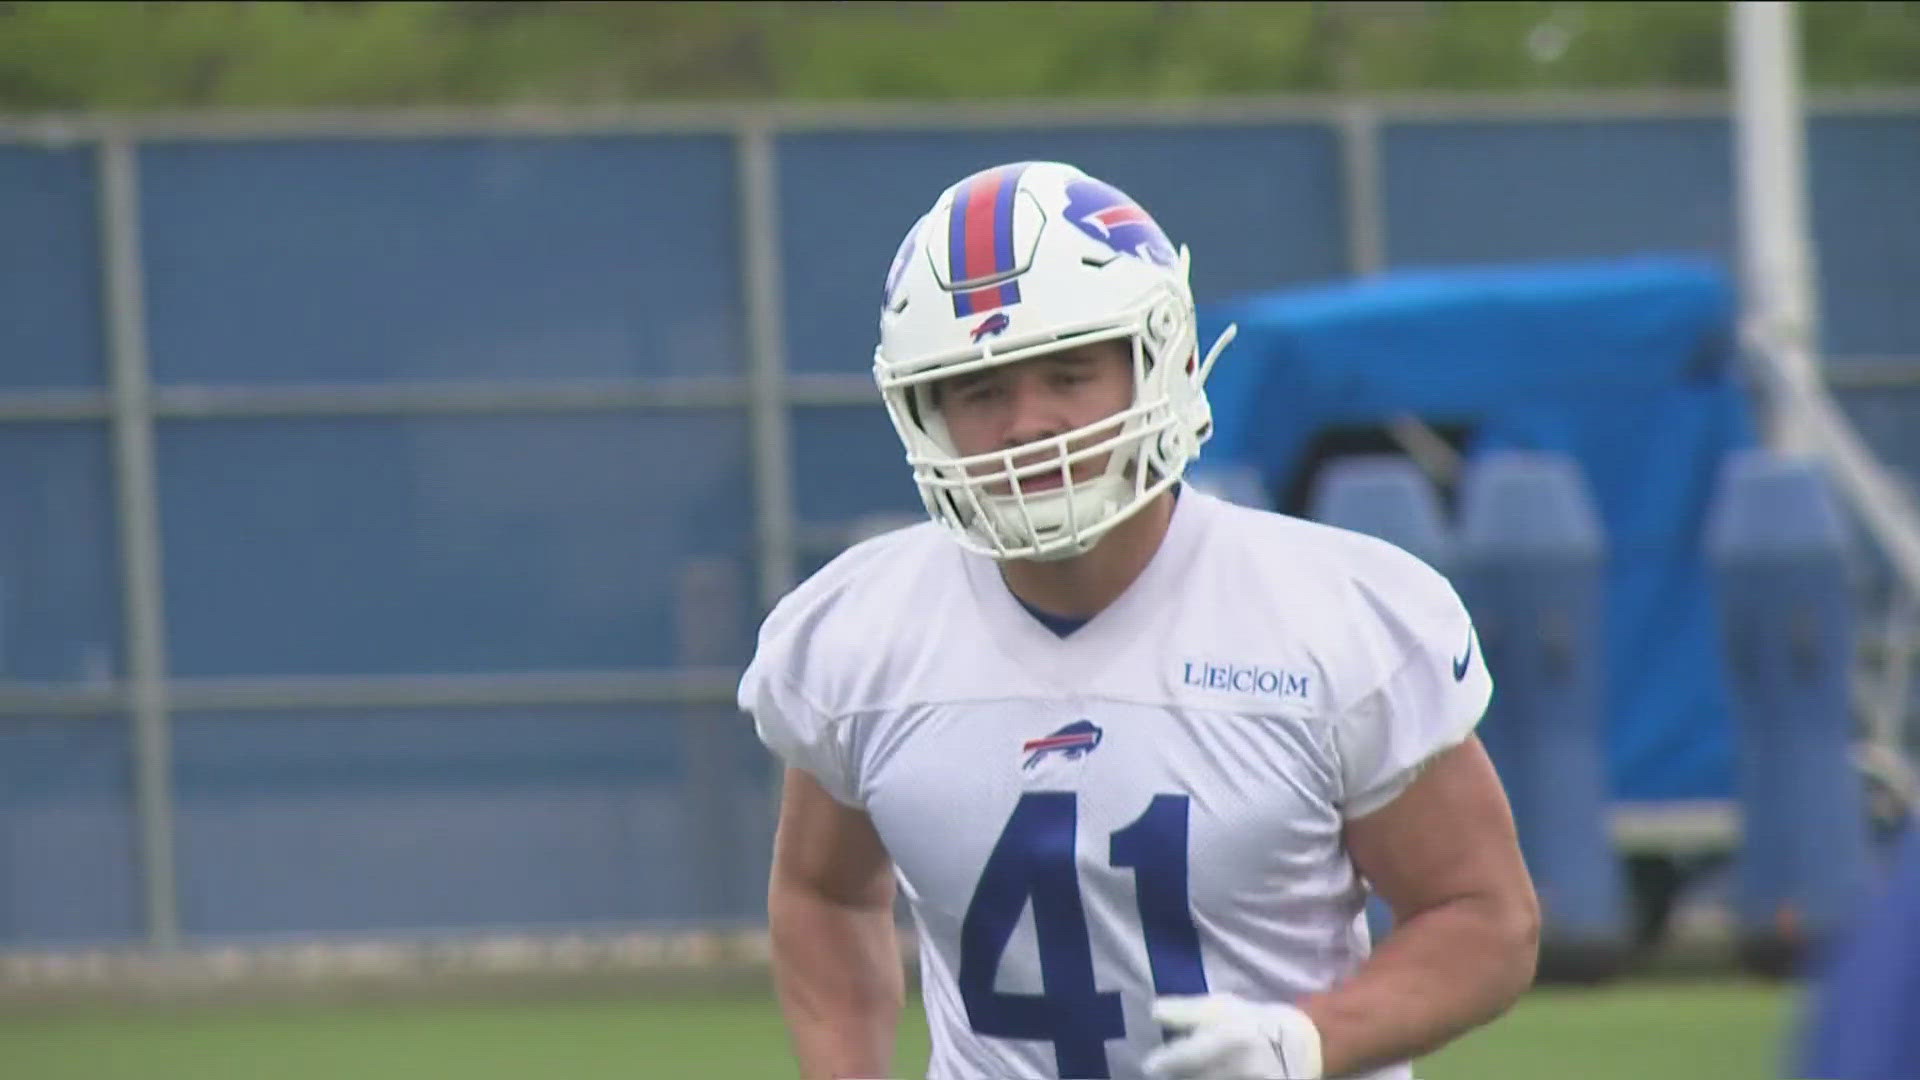 The Buffalo Bills signed Depew native and former UB linebacker Joe Andreessen who participated in the Bills' rookie minicamp on a try-out basis.